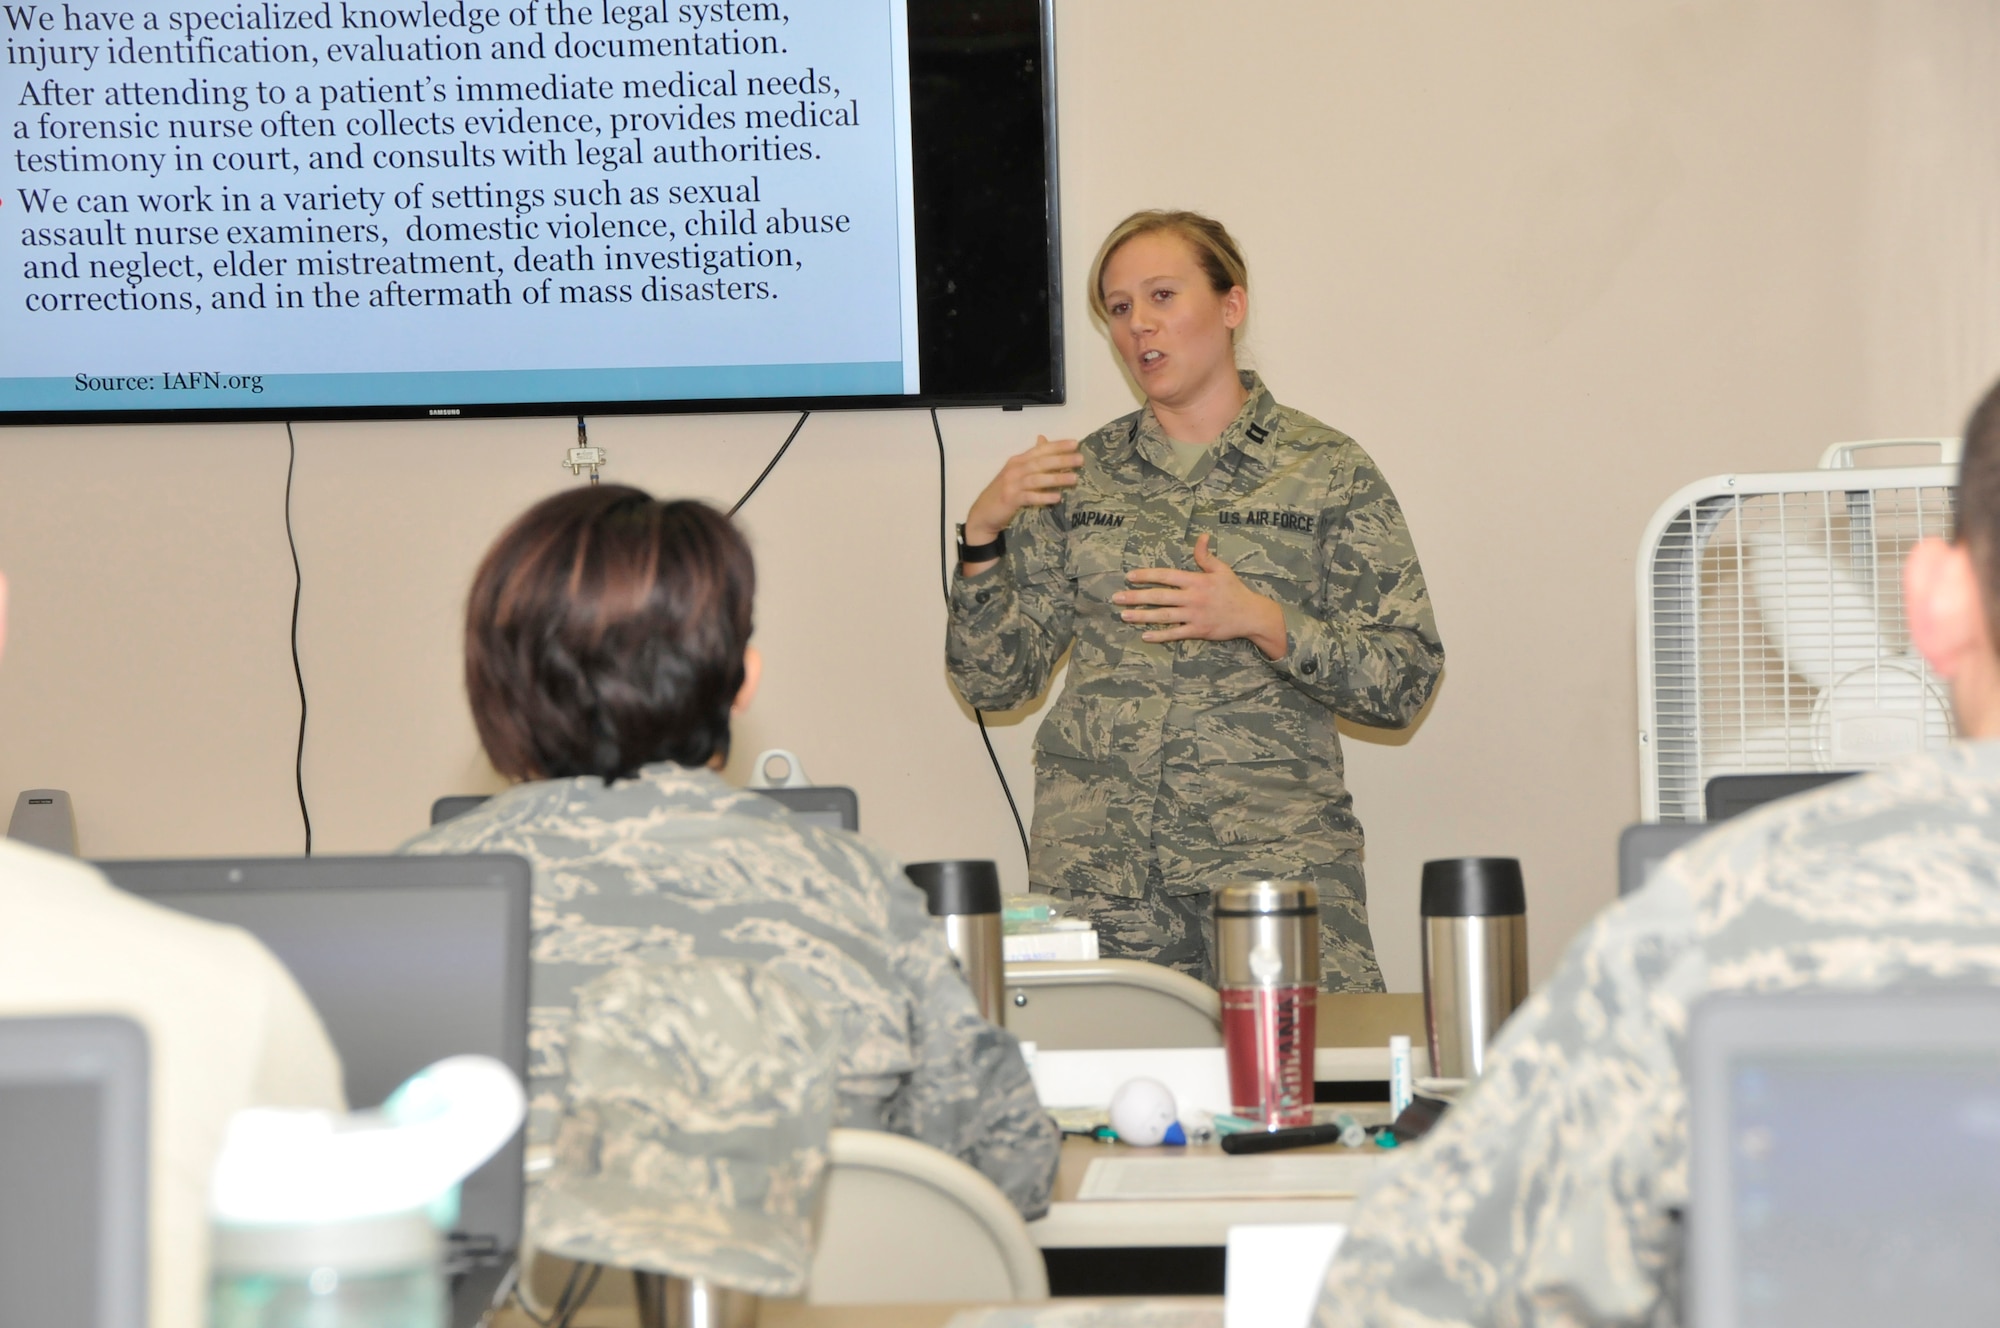 U.S. Air Force Capt. Lindsay G. Chapman from the 181st Intelligence Wing Medical Group, explains how her civilian job as an emergency nurse and sexual assault nurse examiner and how the 181st and Terre Haute Regional Hospital work together on this subject, held at Hulman Field, Terre Haute, Ind., March 18, 2016. (U.S. Air National Guard photo by Senior Master Sgt. John S. Chapman)